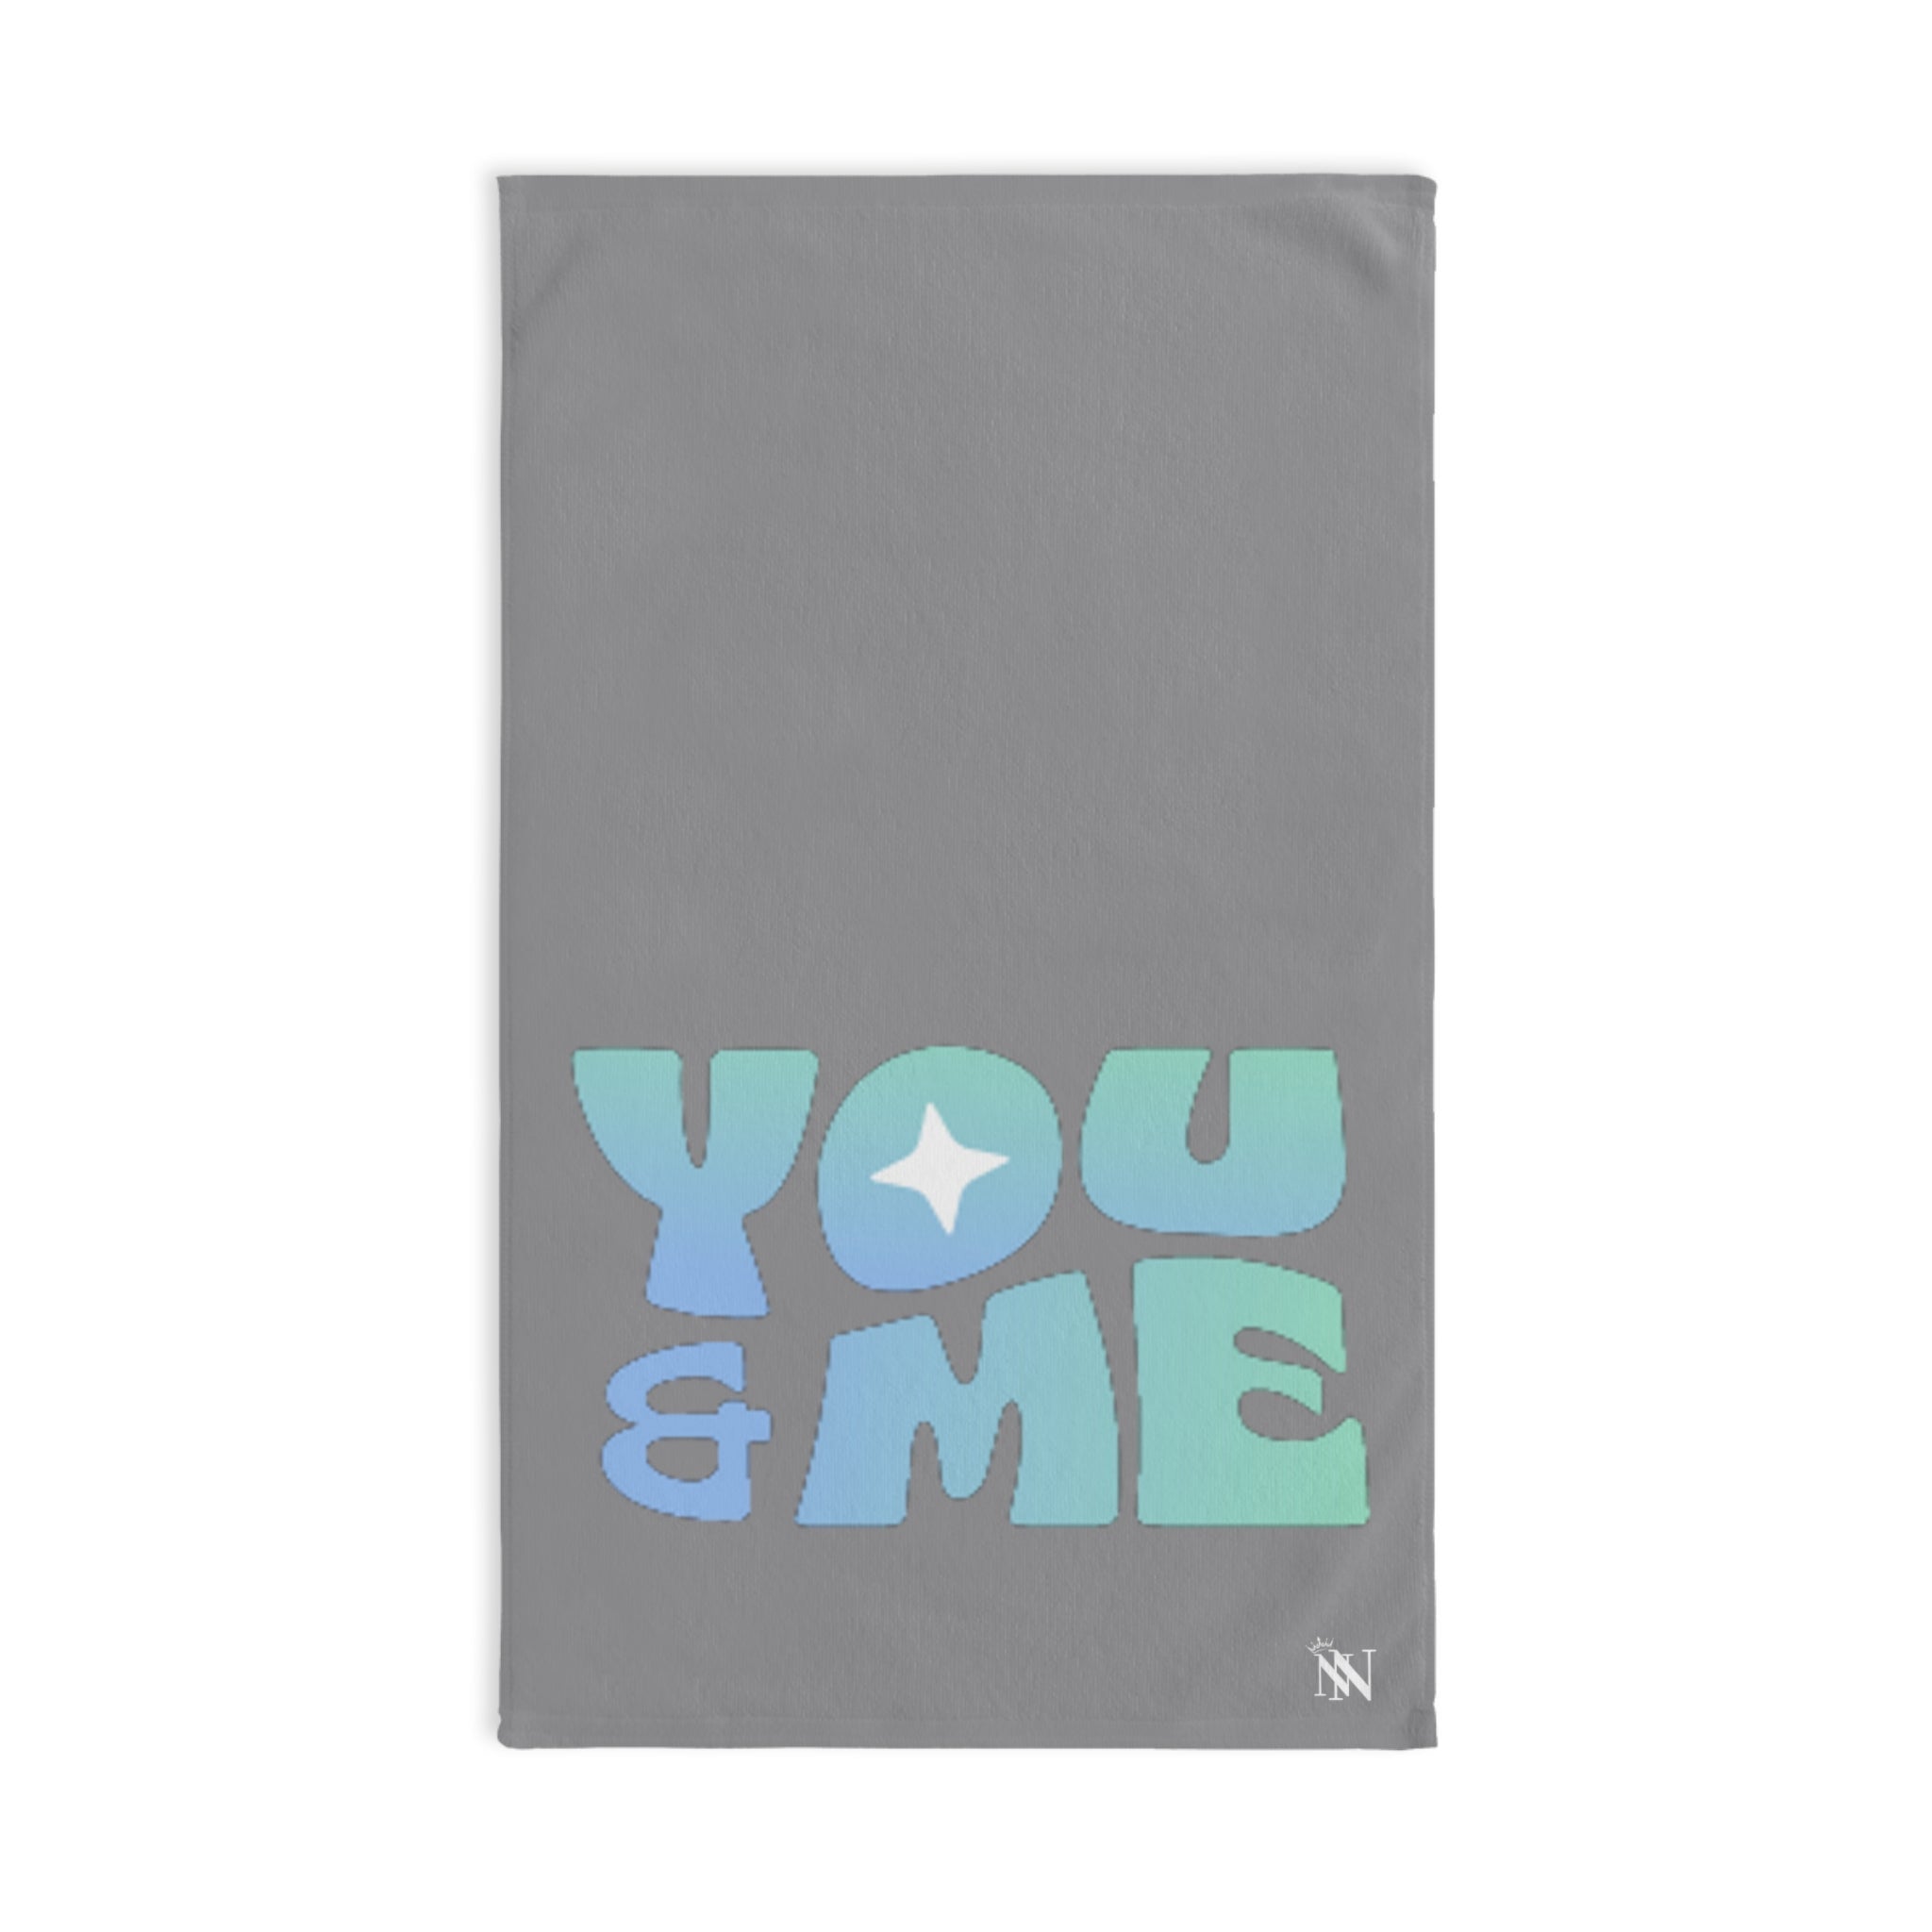 You Me Together Grey | Anniversary Wedding, Christmas, Valentines Day, Birthday Gifts for Him, Her, Romantic Gifts for Wife, Girlfriend, Couples Gifts for Boyfriend, Husband NECTAR NAPKINS